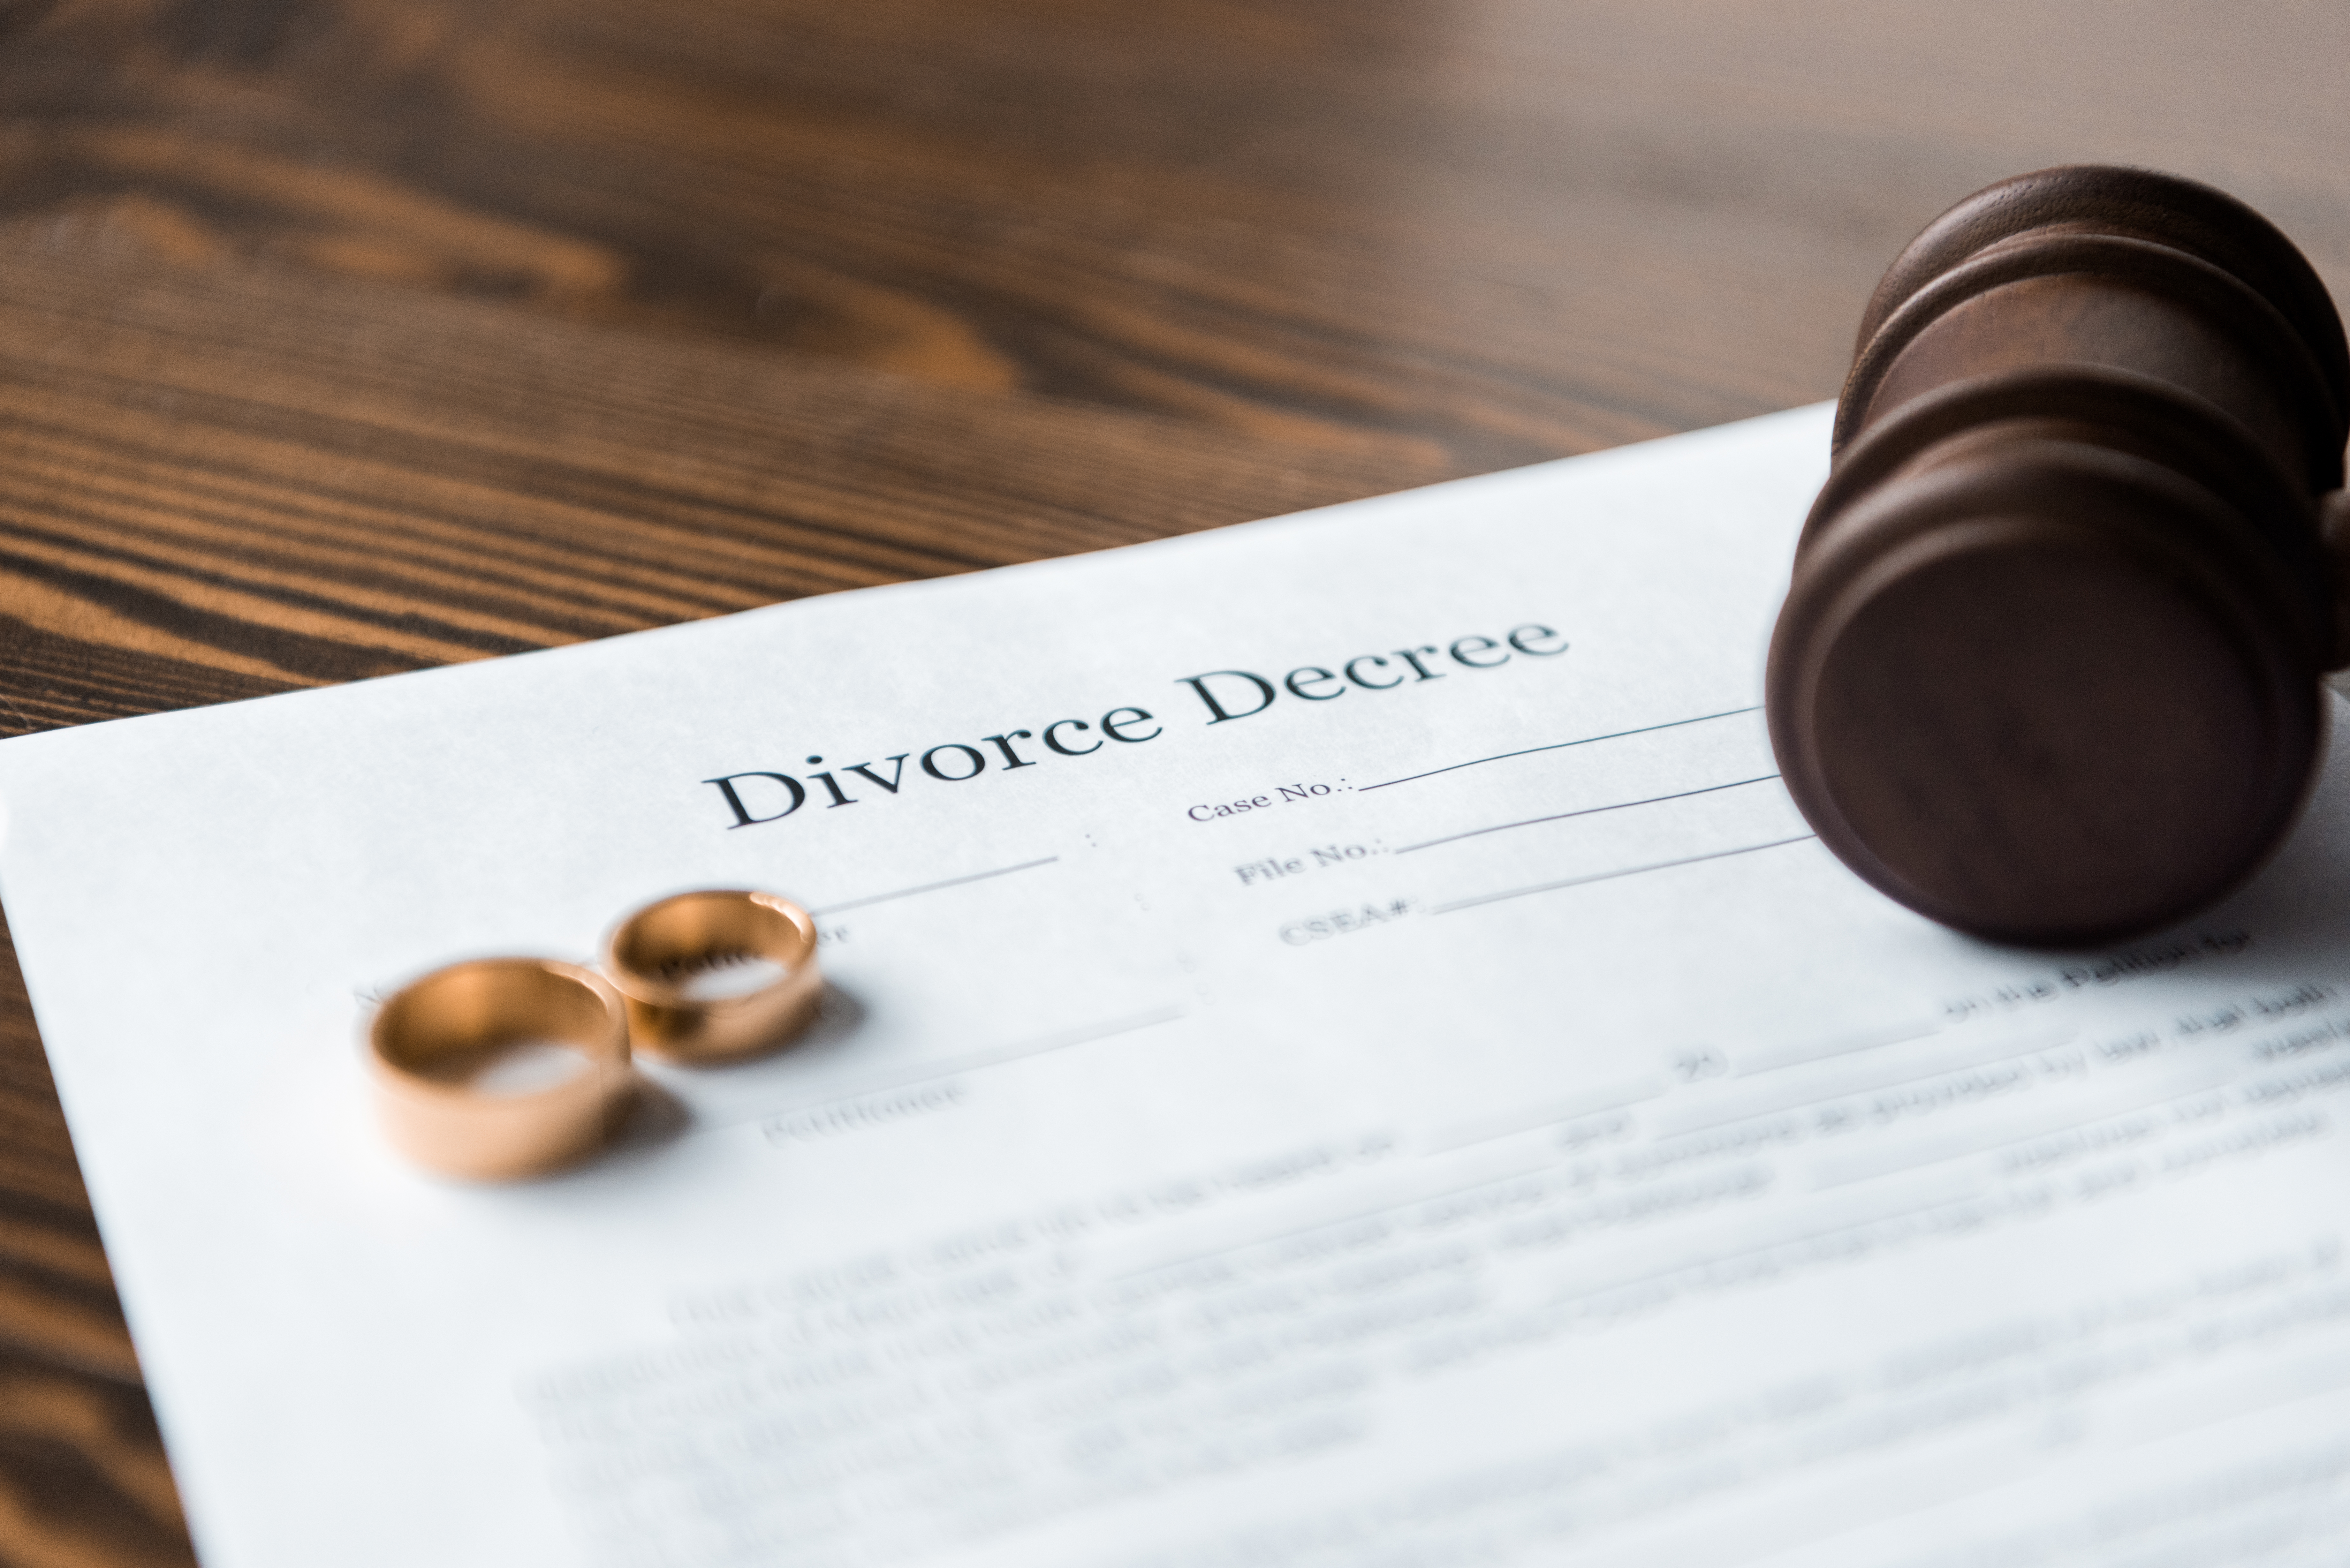 WHAT ARE THE 5 MAJOR DIVORCE CONCERNS FOR COUPLES WHO ARE HIGH NET WORTH?